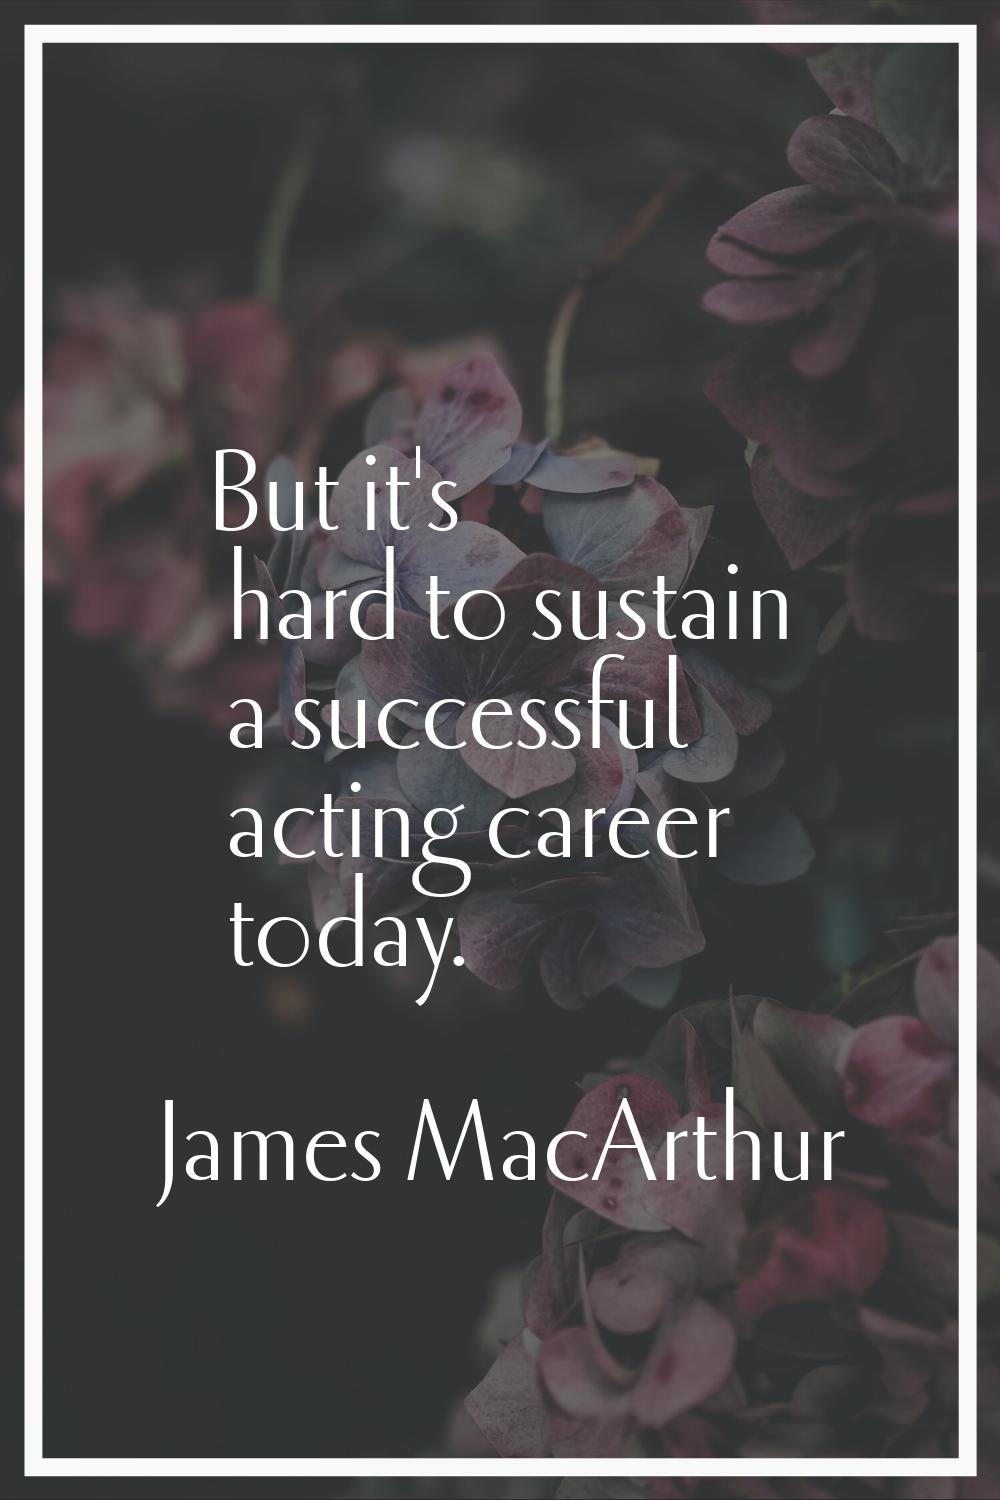 But it's hard to sustain a successful acting career today.